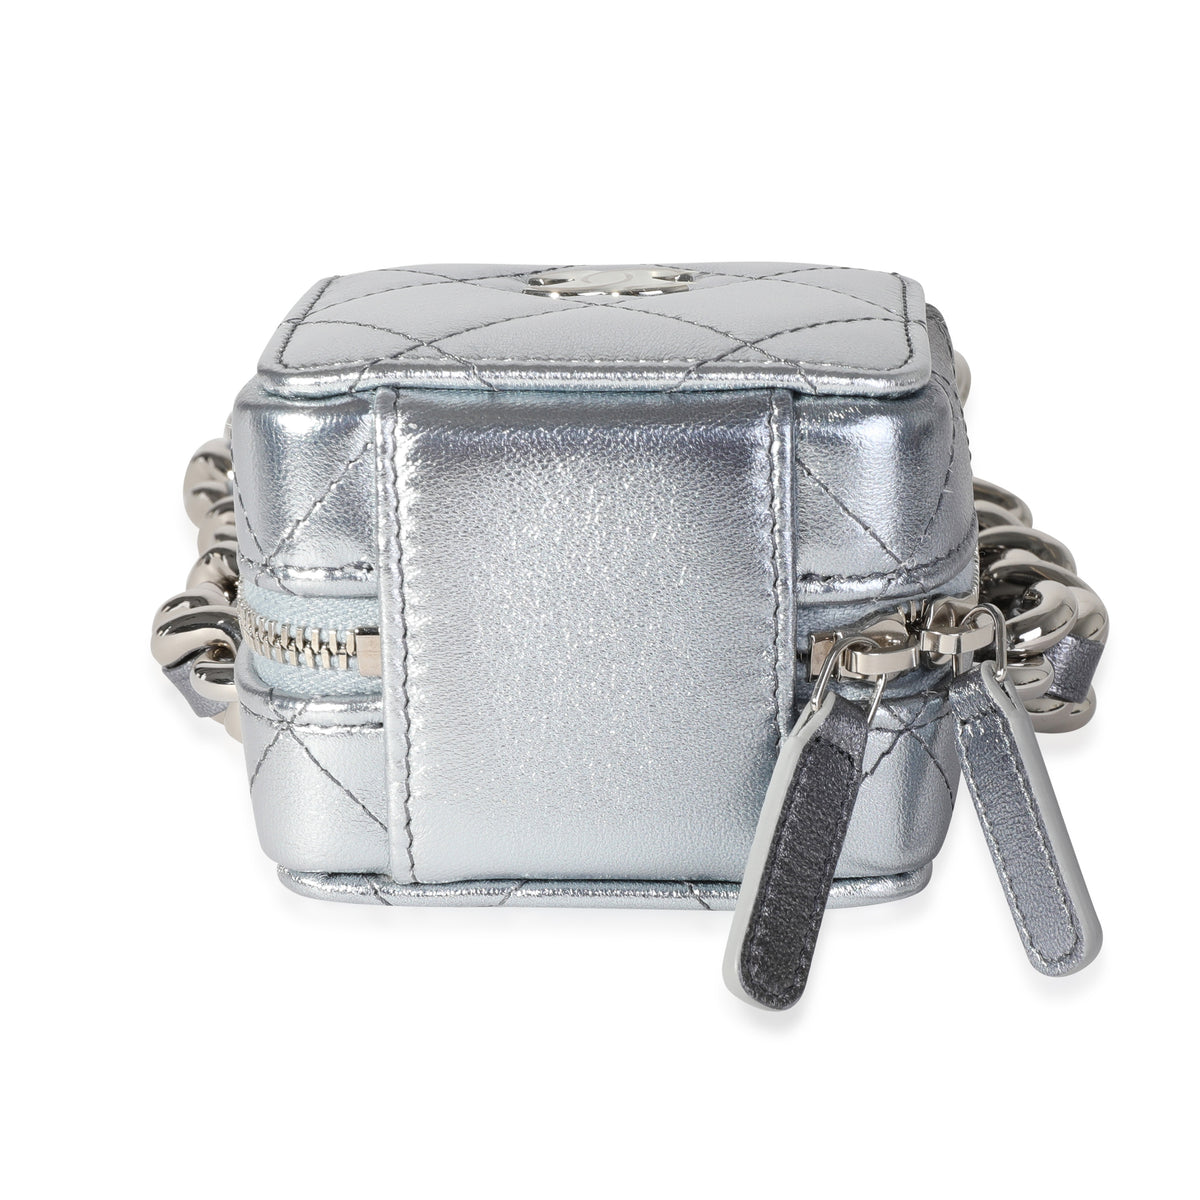 Metallic Lambskin Quilted Coco Punk Clutch With Chain